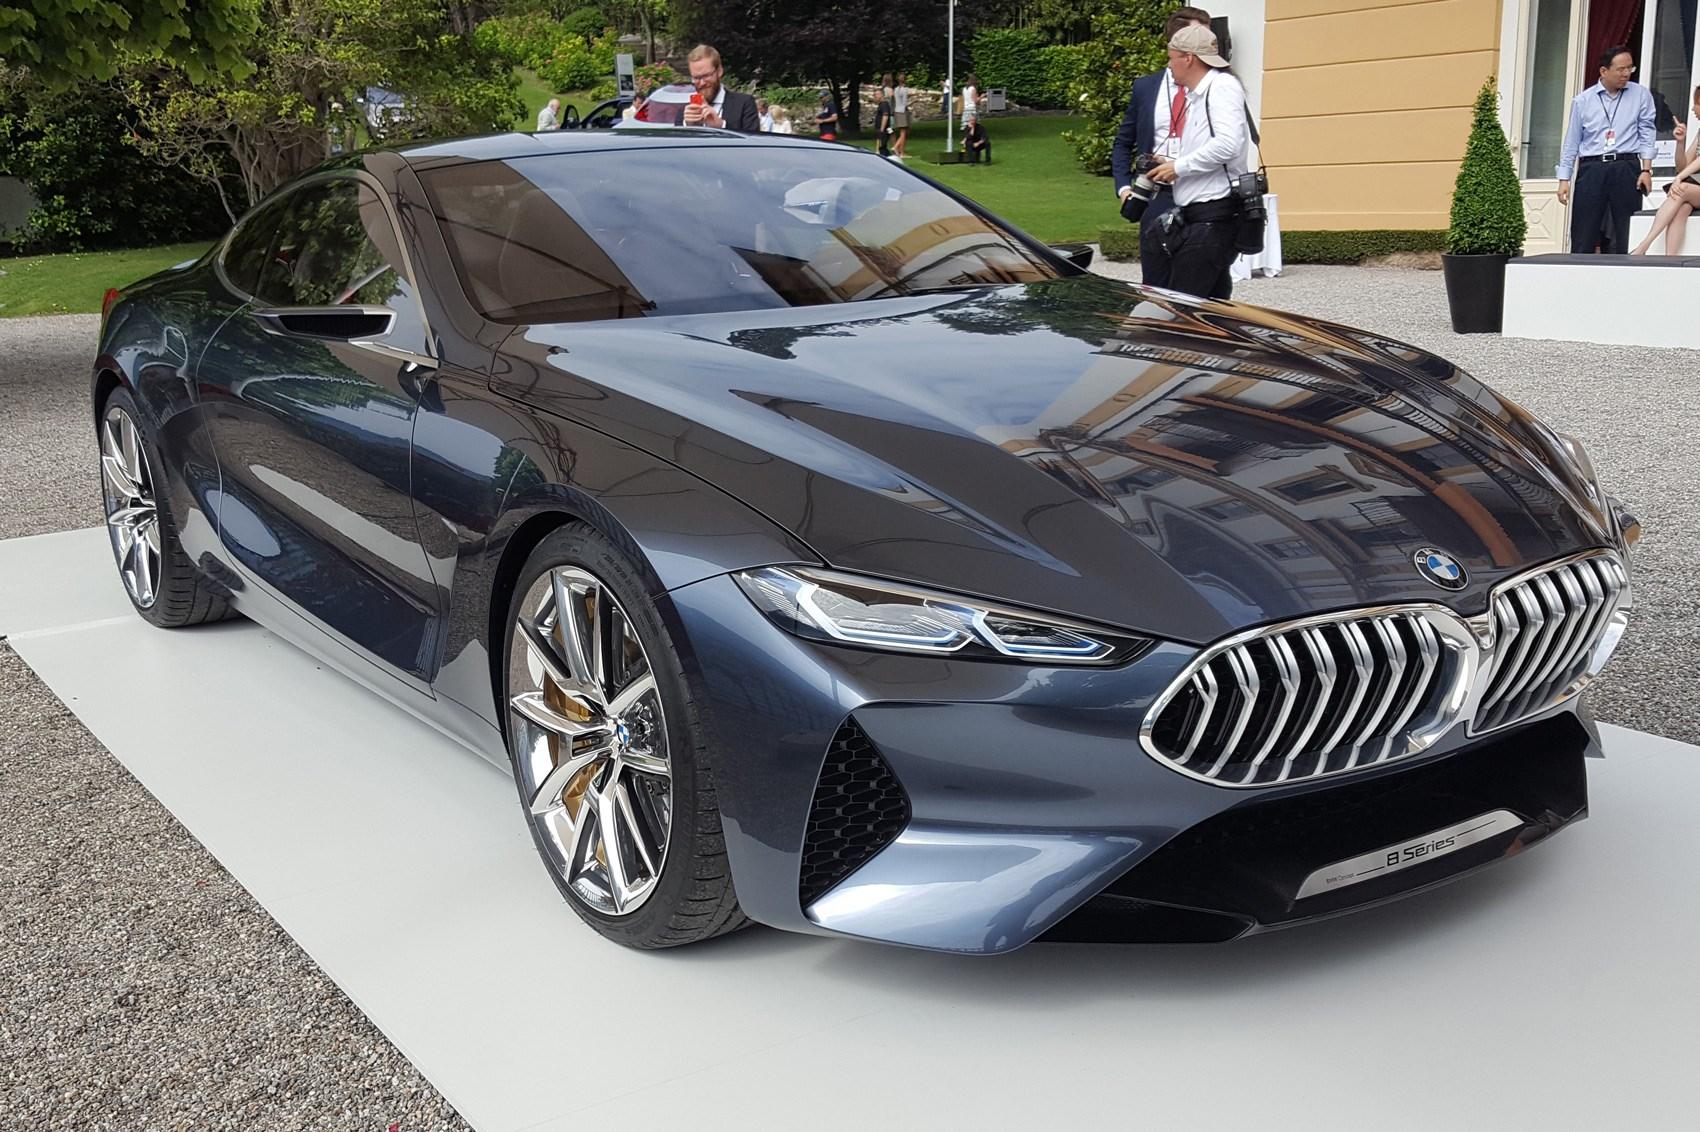 It's Back! BMW Concept 8 Series Previews New Plush Coupe